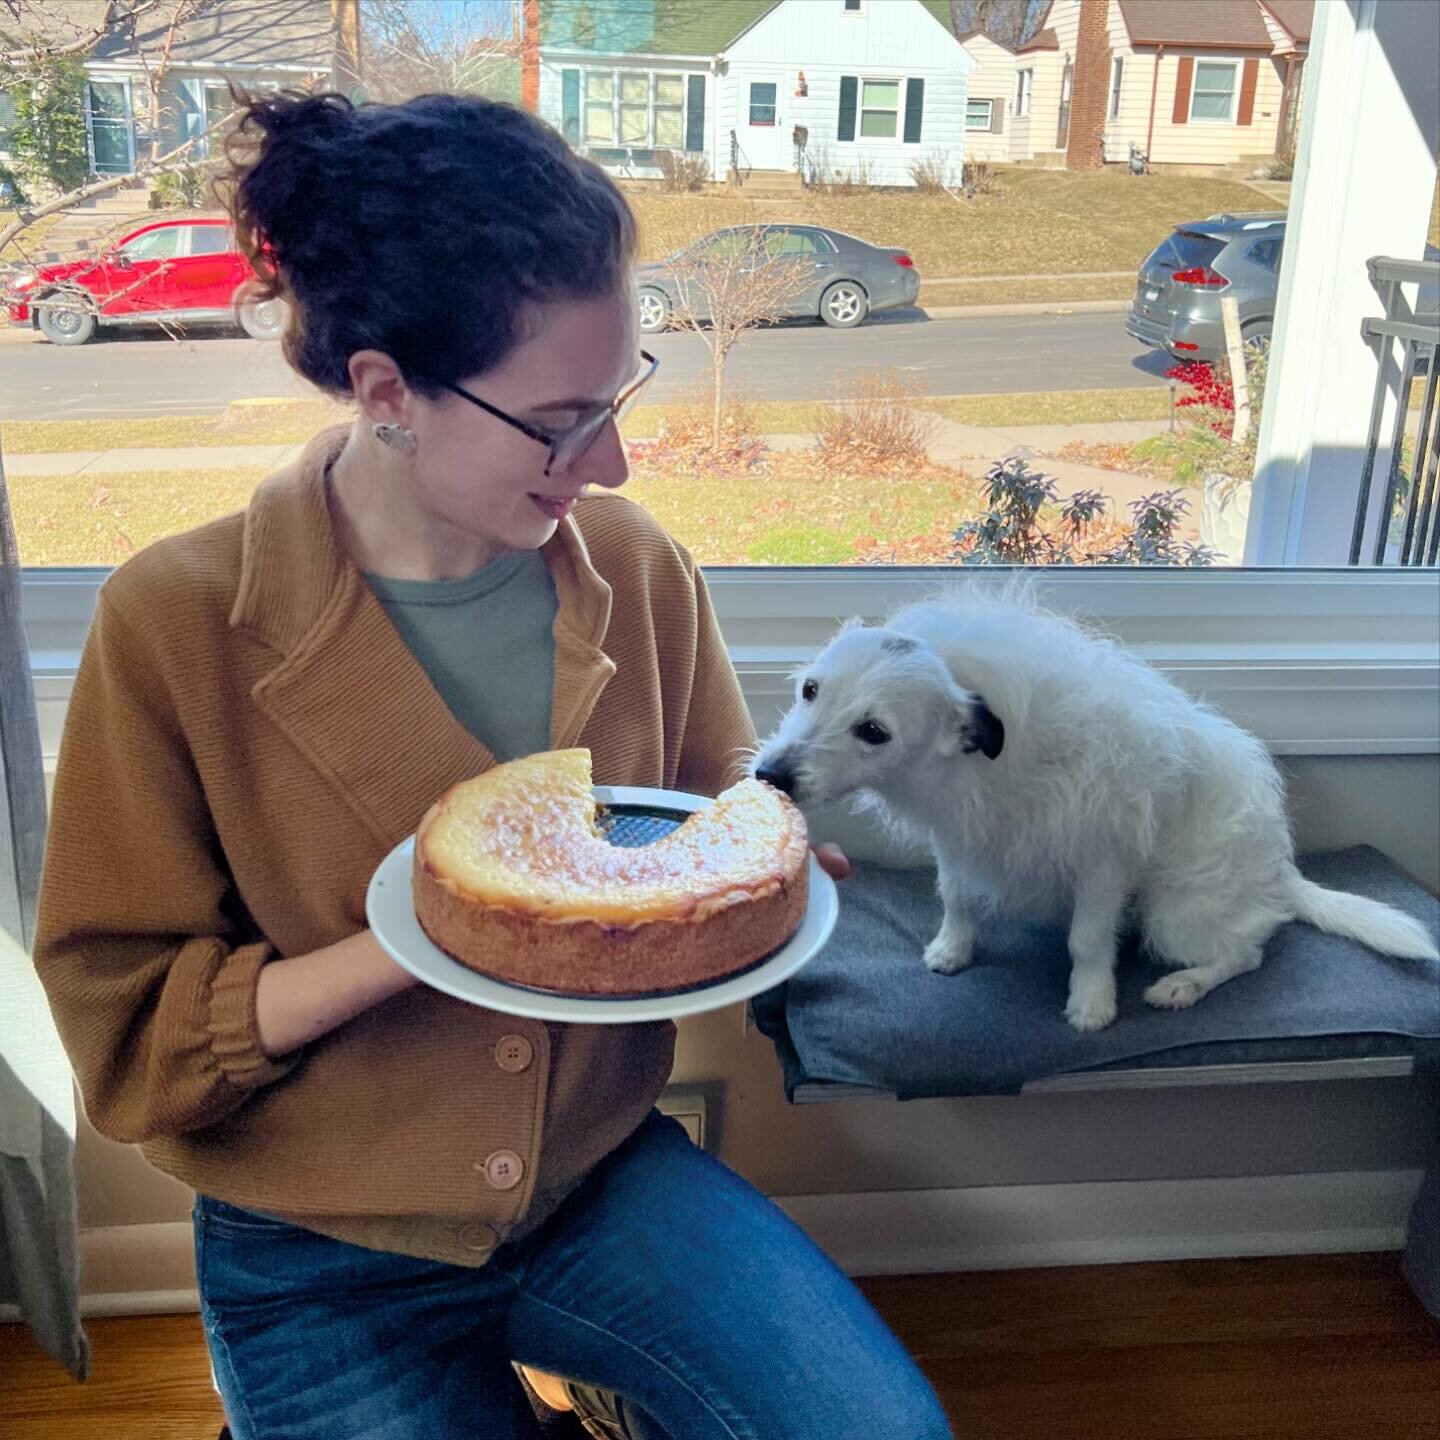 If you&rsquo;ve read &ldquo;Tolita: The Best Bad Dog&rdquo; then you know what this means&hellip;we made a ricotta cake! After testing out Grandma&rsquo;s recipe to make sure we could recreate the famous ricotta cake, we&rsquo;re ready to share it wi